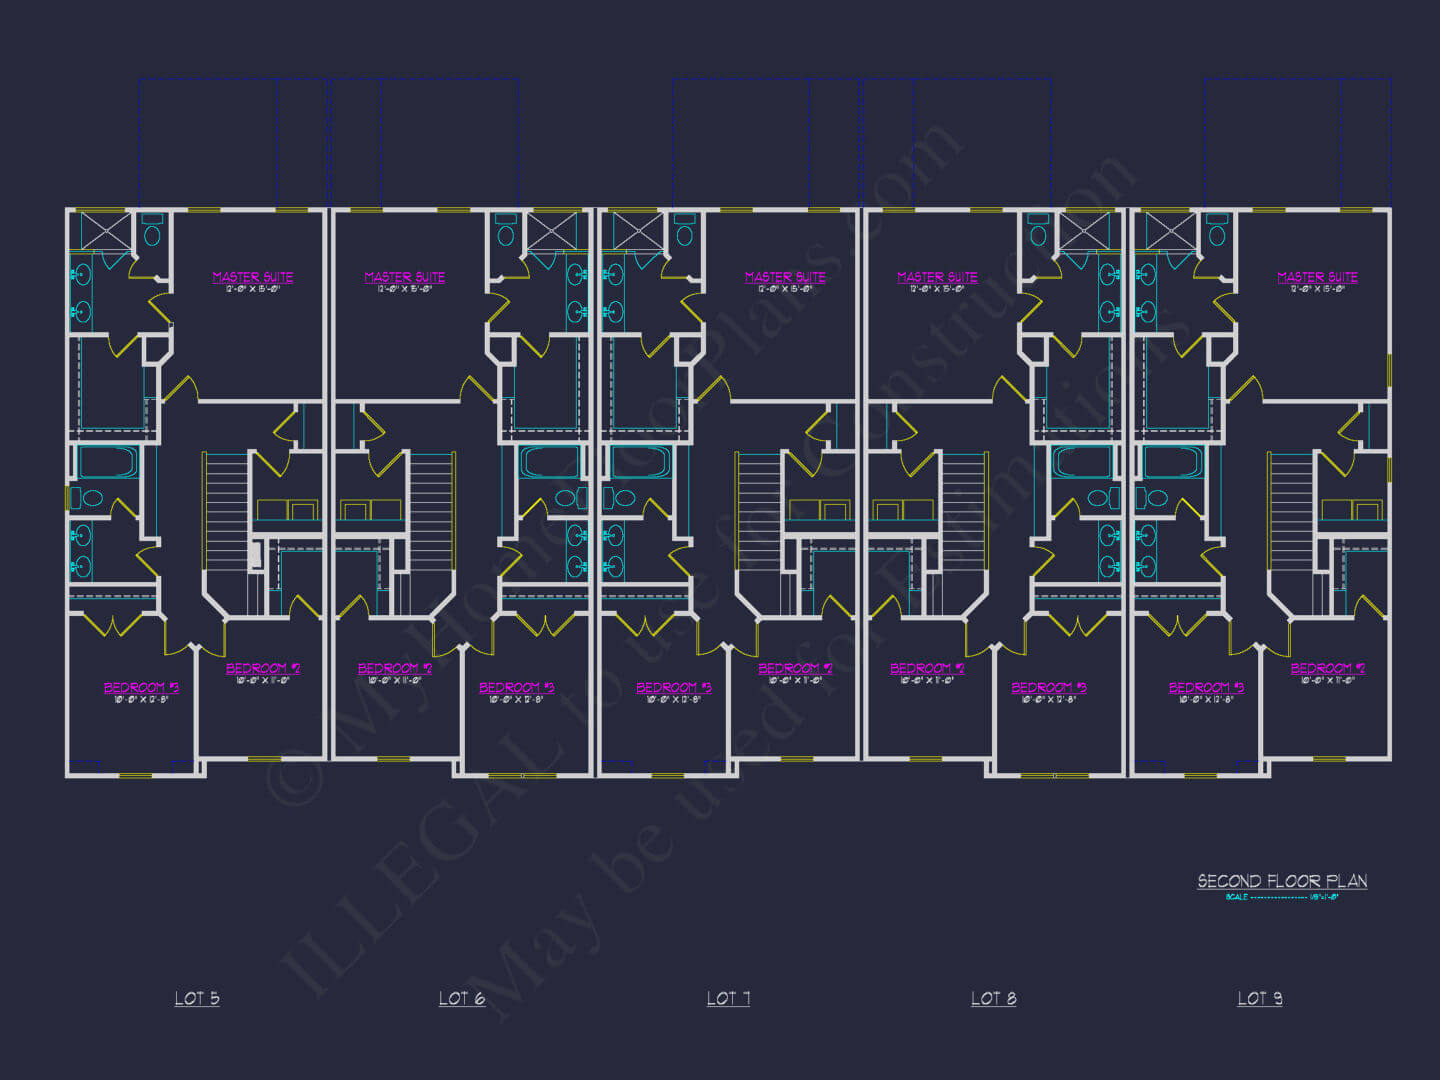 20-2108-13 apartment townhome MY HOME FLOOR PLANS_Page_11